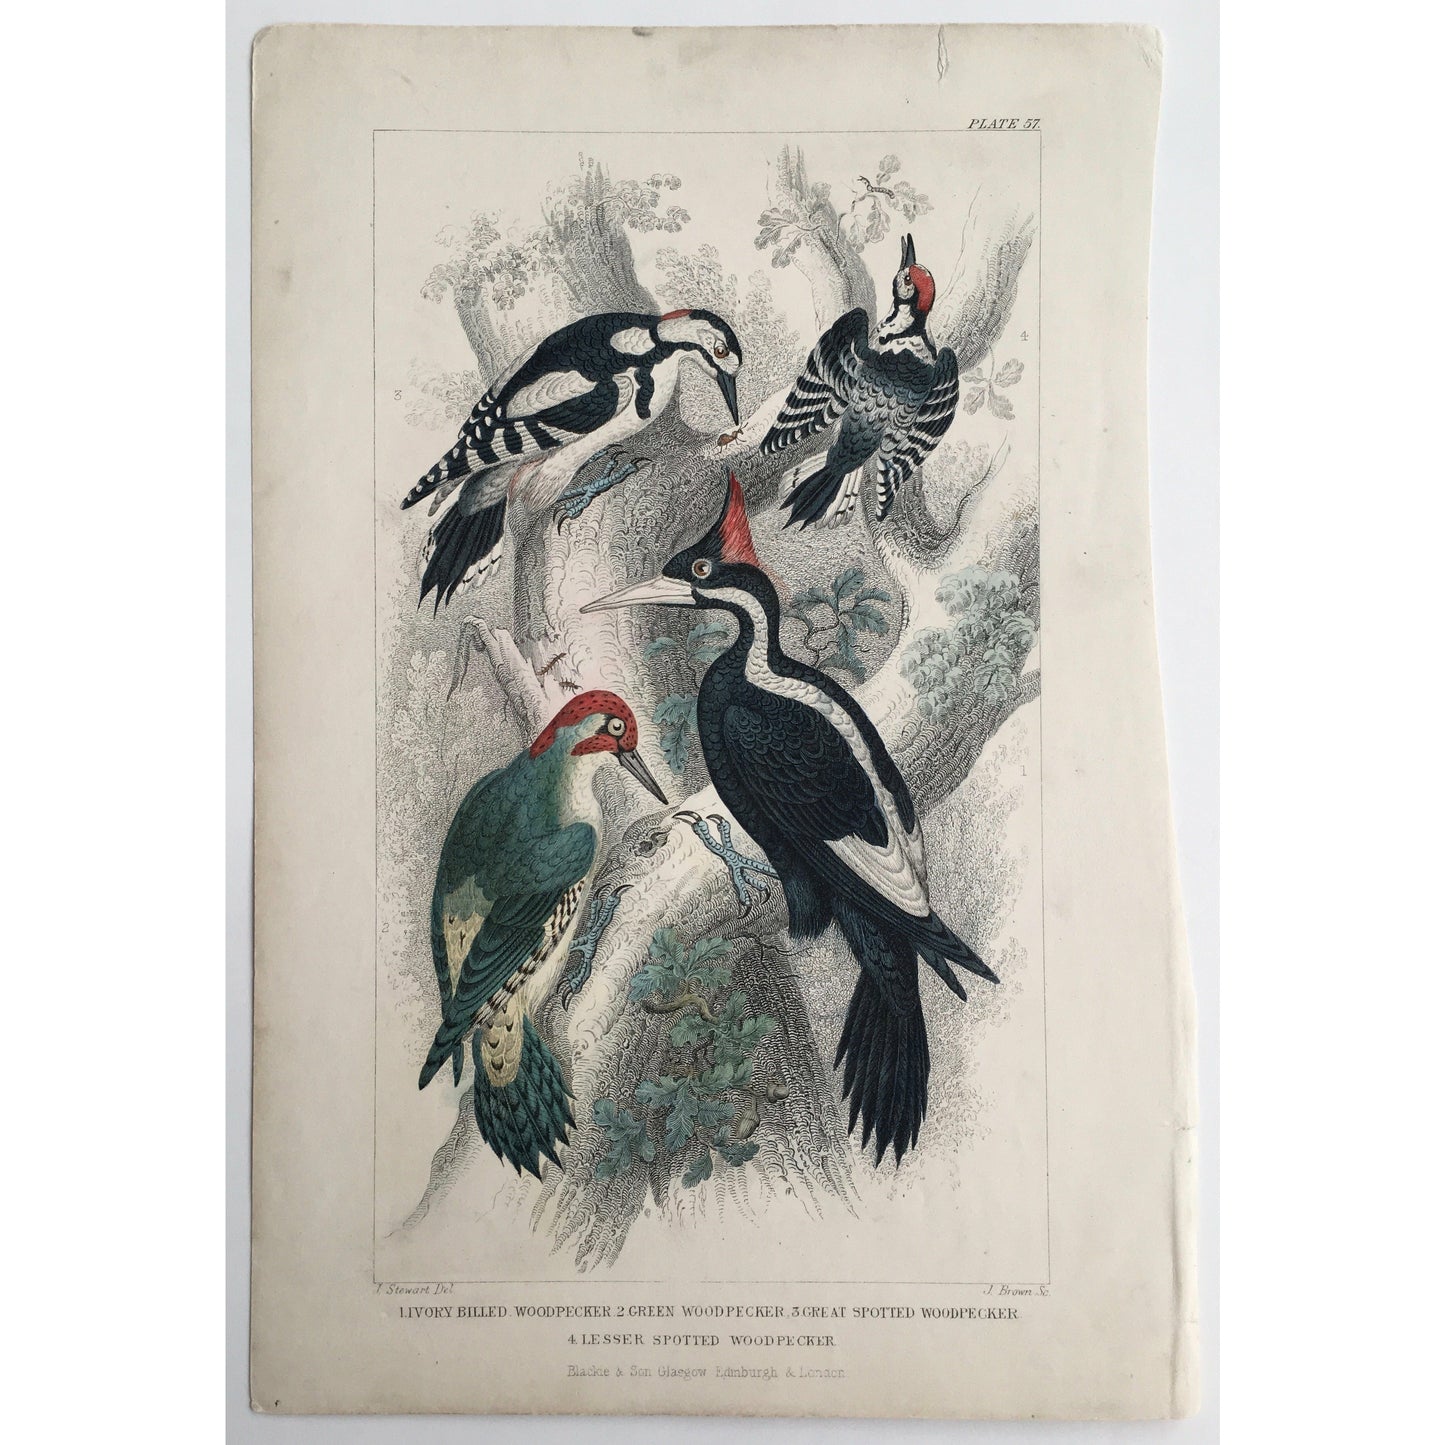 Woodpecker, Ivory Billed Woodpecker, Green Woodpecker, Great Spotted Woodpecker, Lesser Spotted Woodpecker, Bird, Birds, Ornithology, Oliver Goldsmith, Goldsmith, Natural History, Animals, Wildlife, A History of the Earth and Animated Nature, Nature, Blackie & Son, Blackie and Son, 1852, Coloured Colorful, J. Stewart, J. Brown, Stewart, Brown, Old Prints, Old Books, Antique, Prints, Art, Home decor, Wall art, 